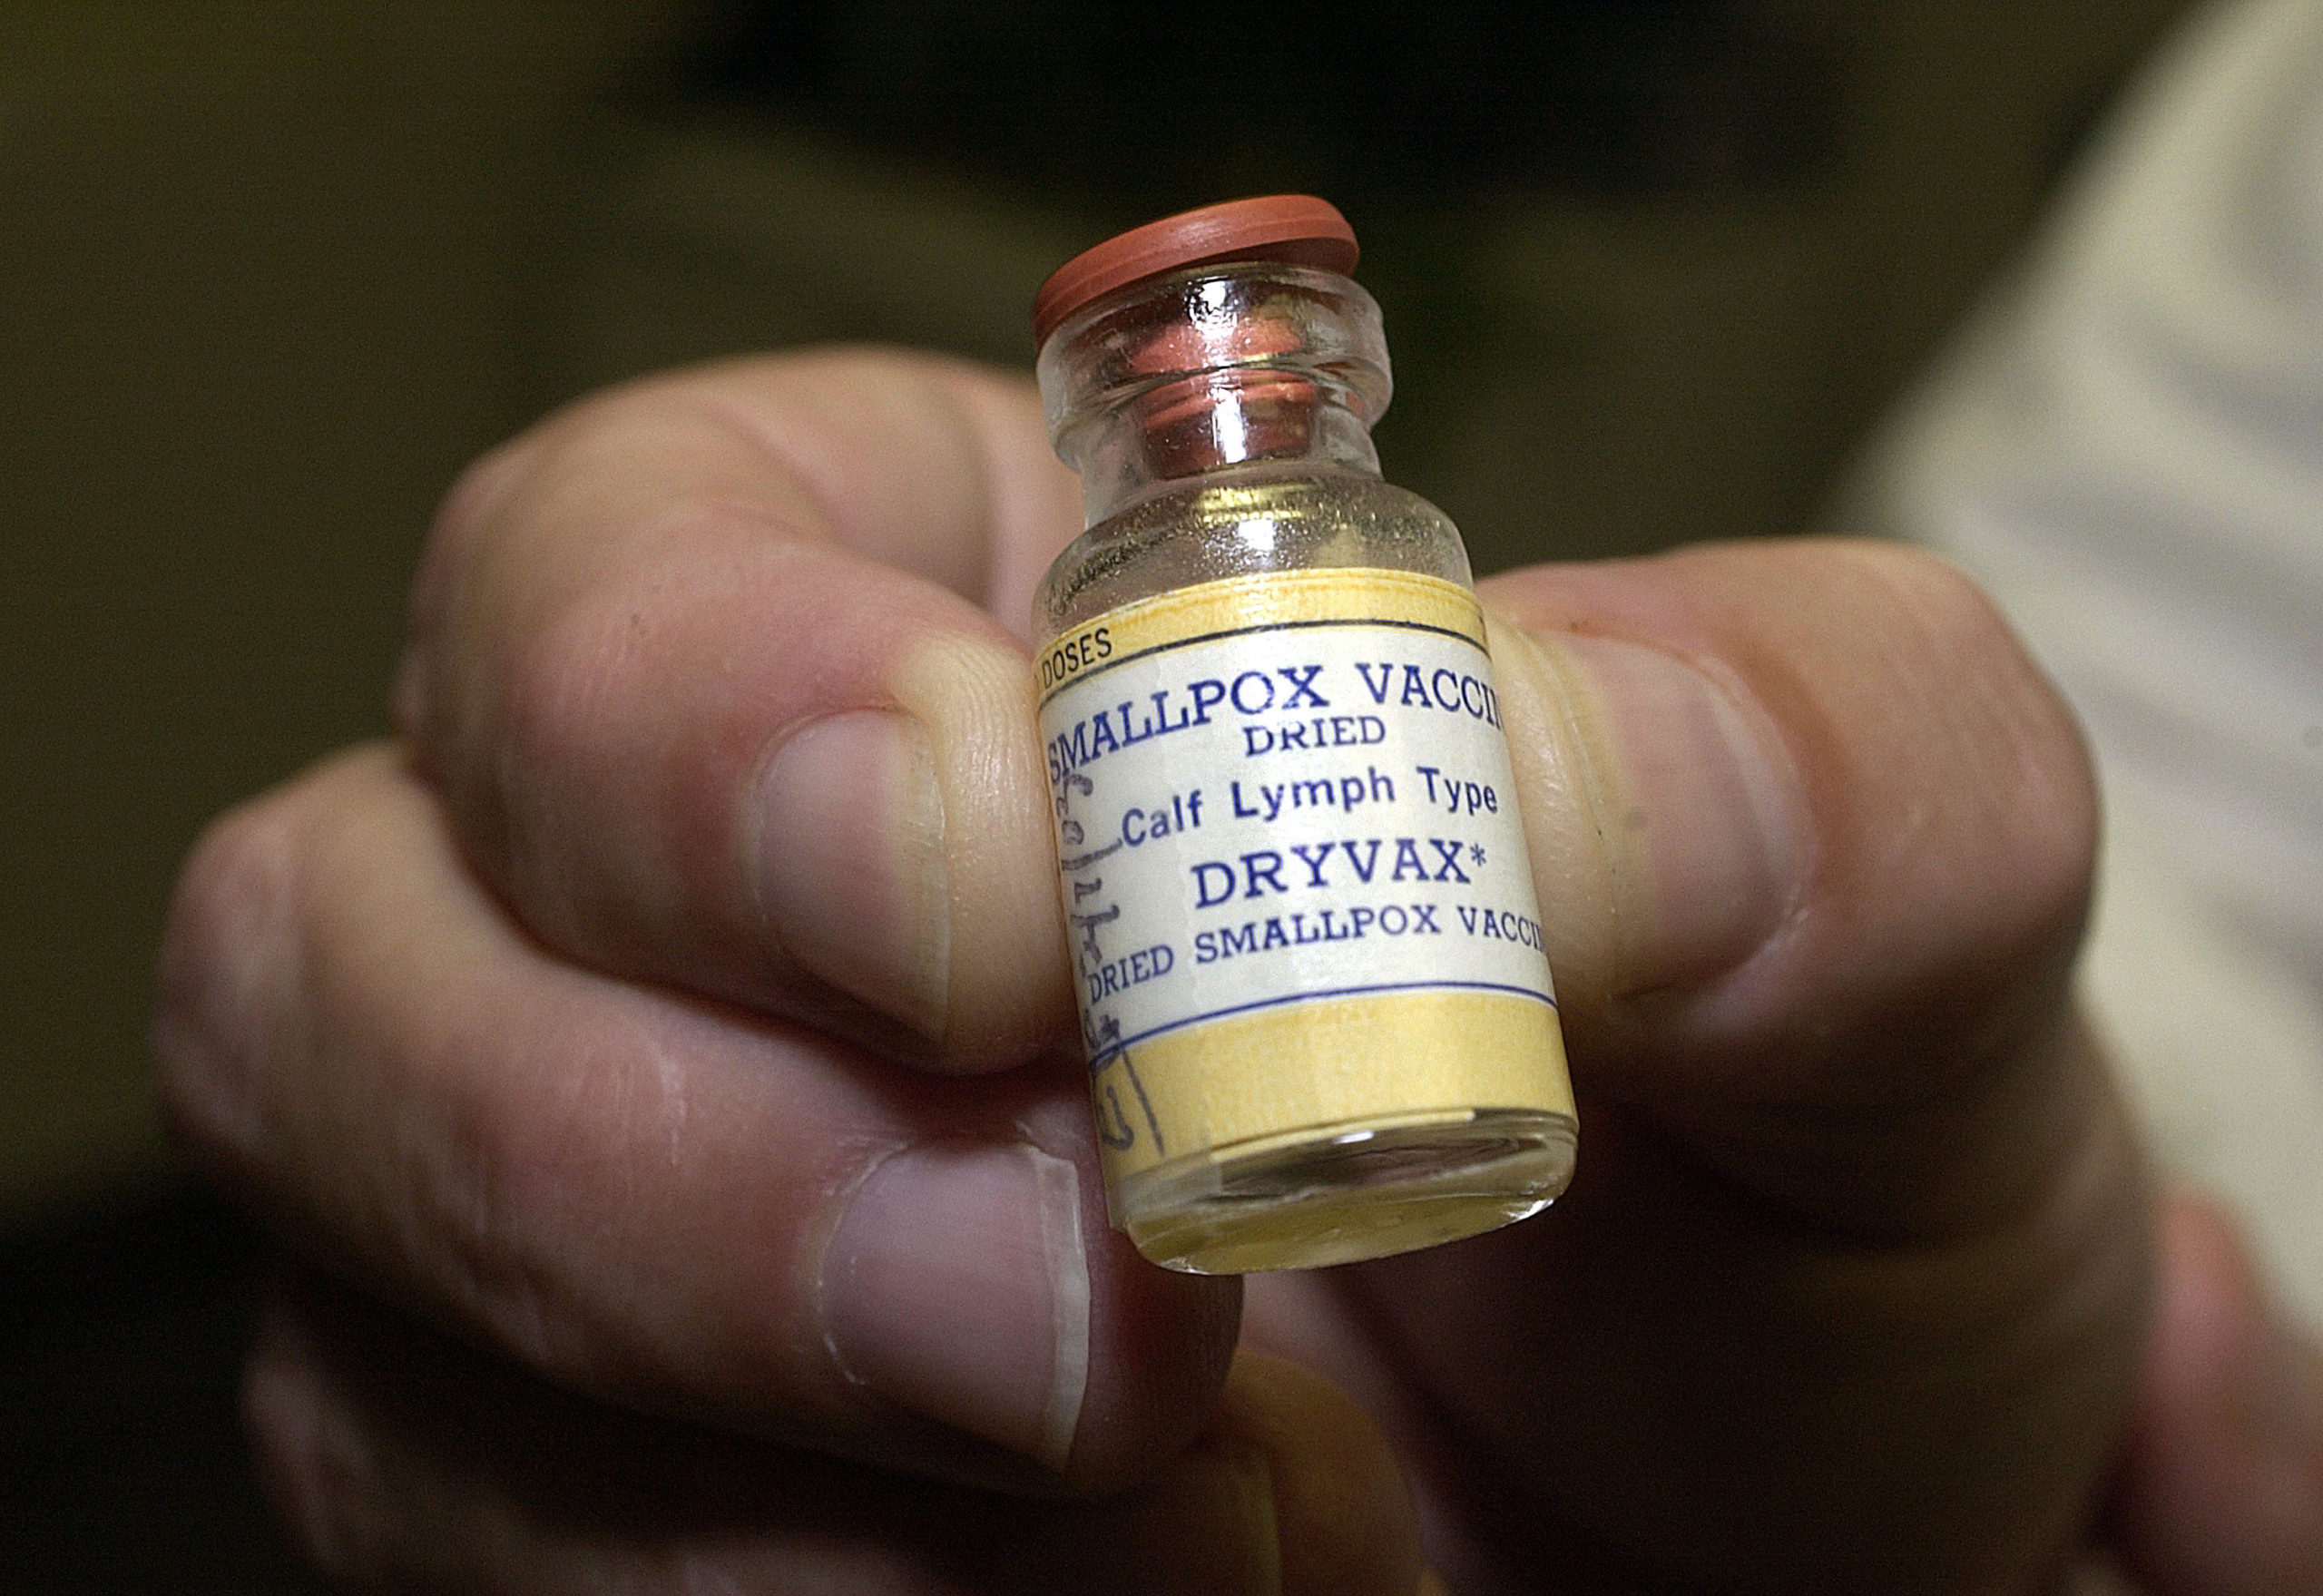 ALTAMONTE SPRINGS, FL - DECEMBER 5: A vial of dried smallpox vaccination is shown December 5, 2002 in Altamonte Springs, Florida. The vial holds approximately 100 doses of the smallpox vaccine. Orlando, Florida area law enforcement agencies plan to be vaccinated for smallpox. (Photo by Scott A. Miller/Getty Images)